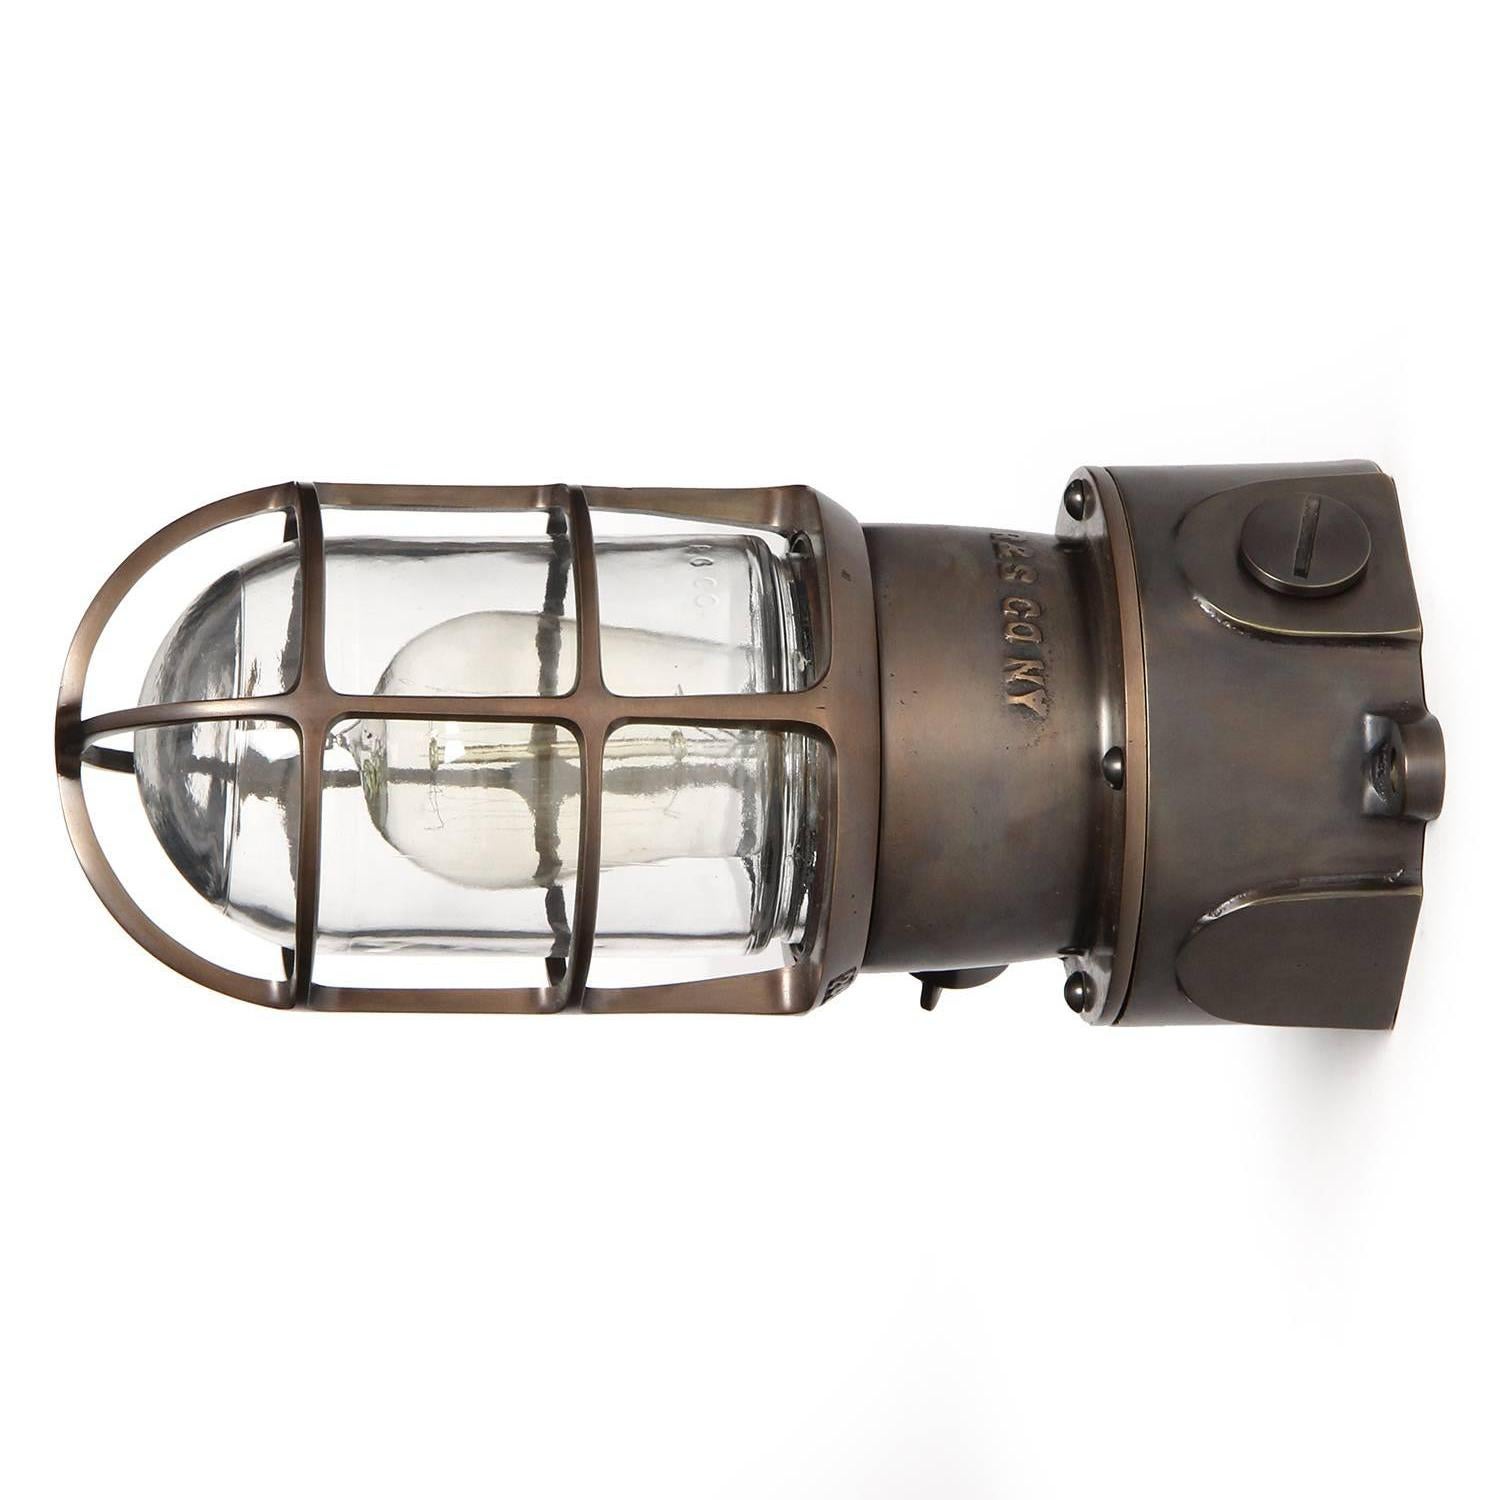 A superb quality industrial caged flush mount light fixture in patinated cast bronze with a thick clear glass diffuser.